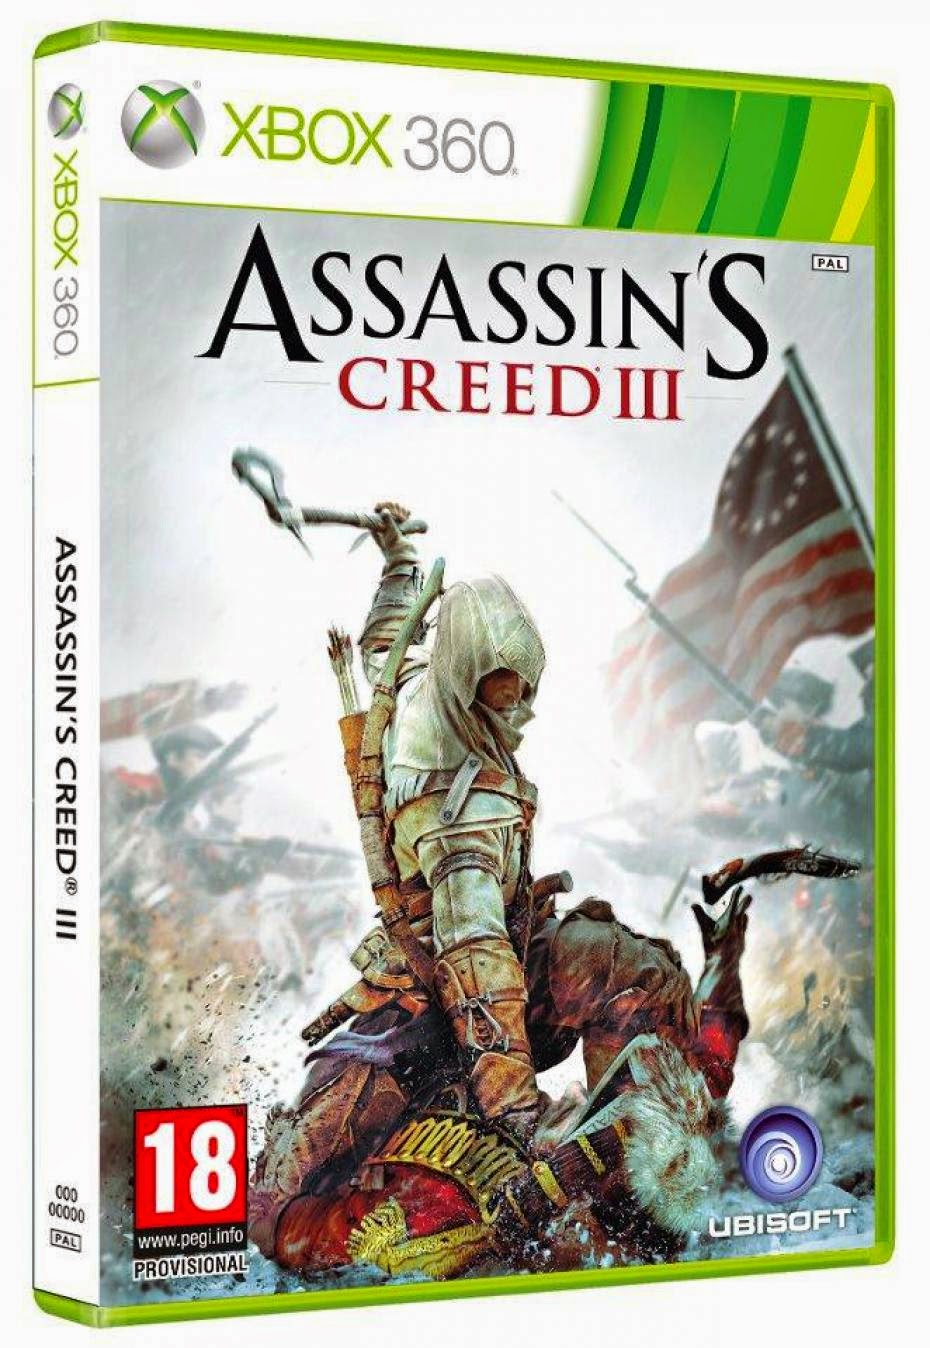 Assassin s xbox 360. Assassin's Creed Xbox 360 диск. Ассасин Крид на Xbox 360. Assassins Creed 3 диск для Xbox 360. Диски для Xbox 360 ассасин.